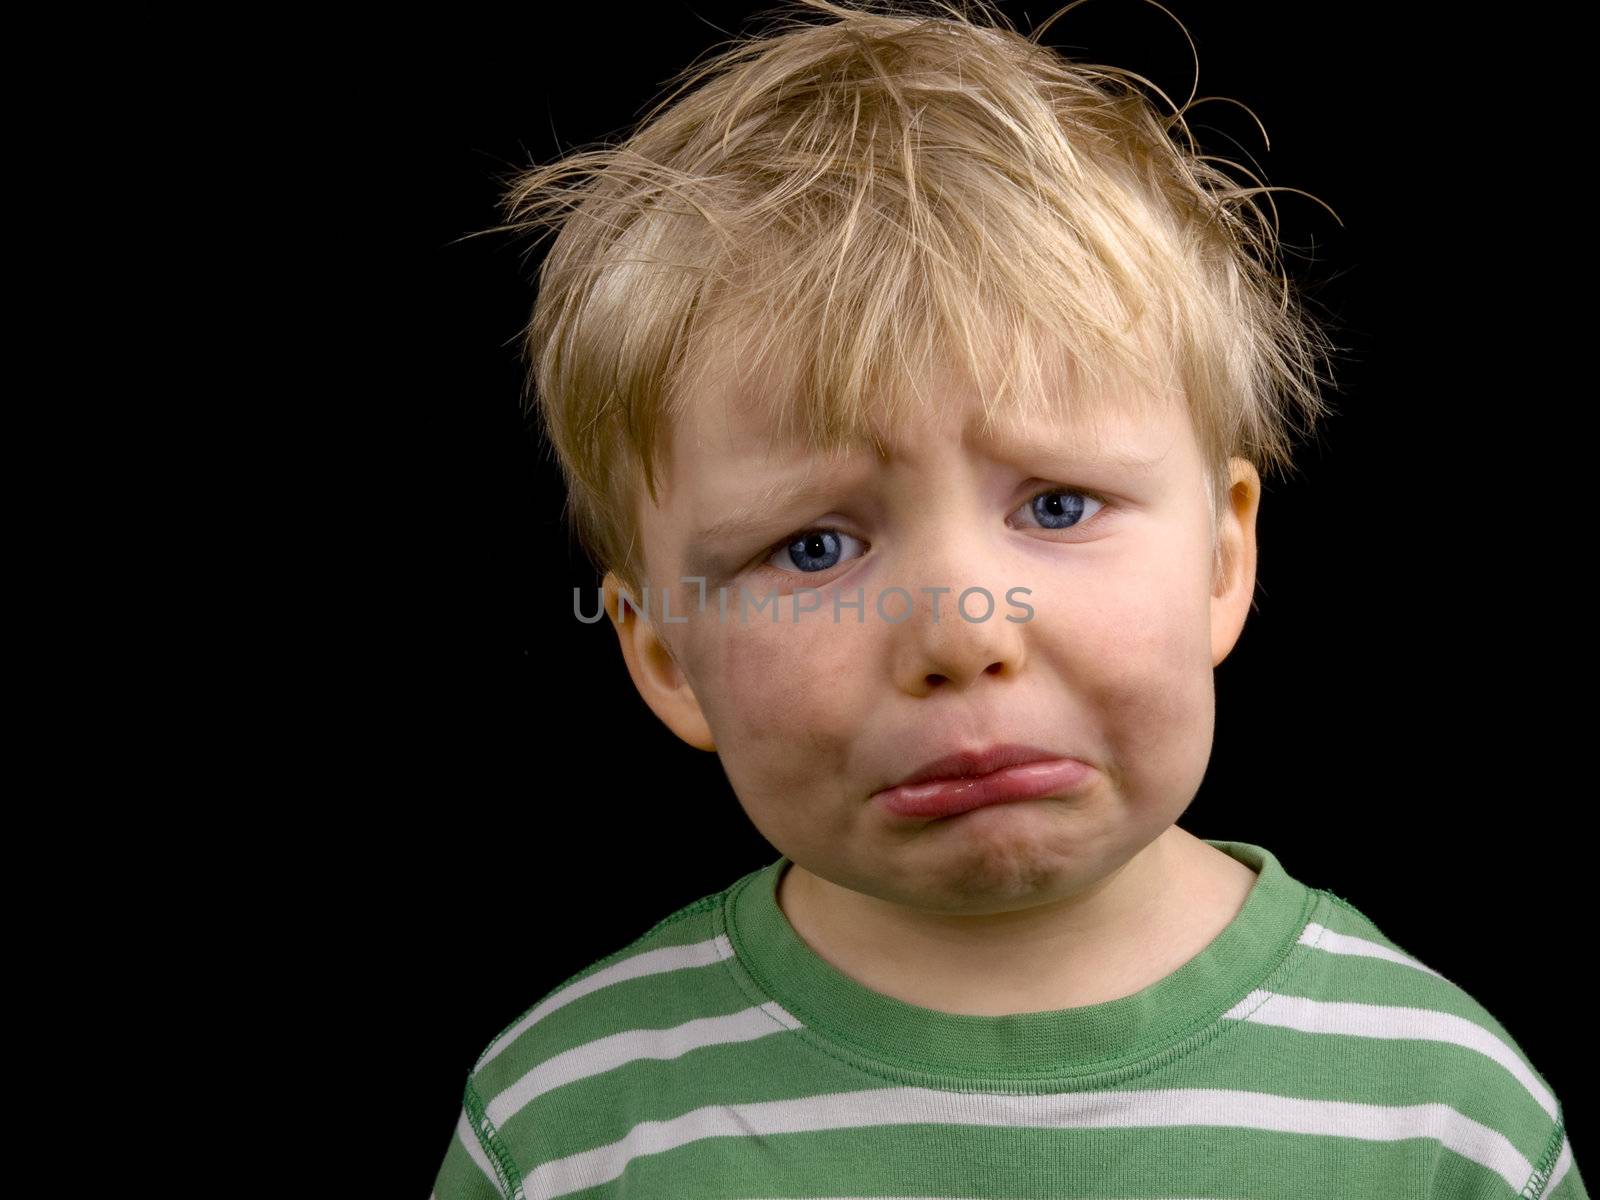 Sad little boy on black background. Boy have blond hair, blue eyes and a bit of dirt on face